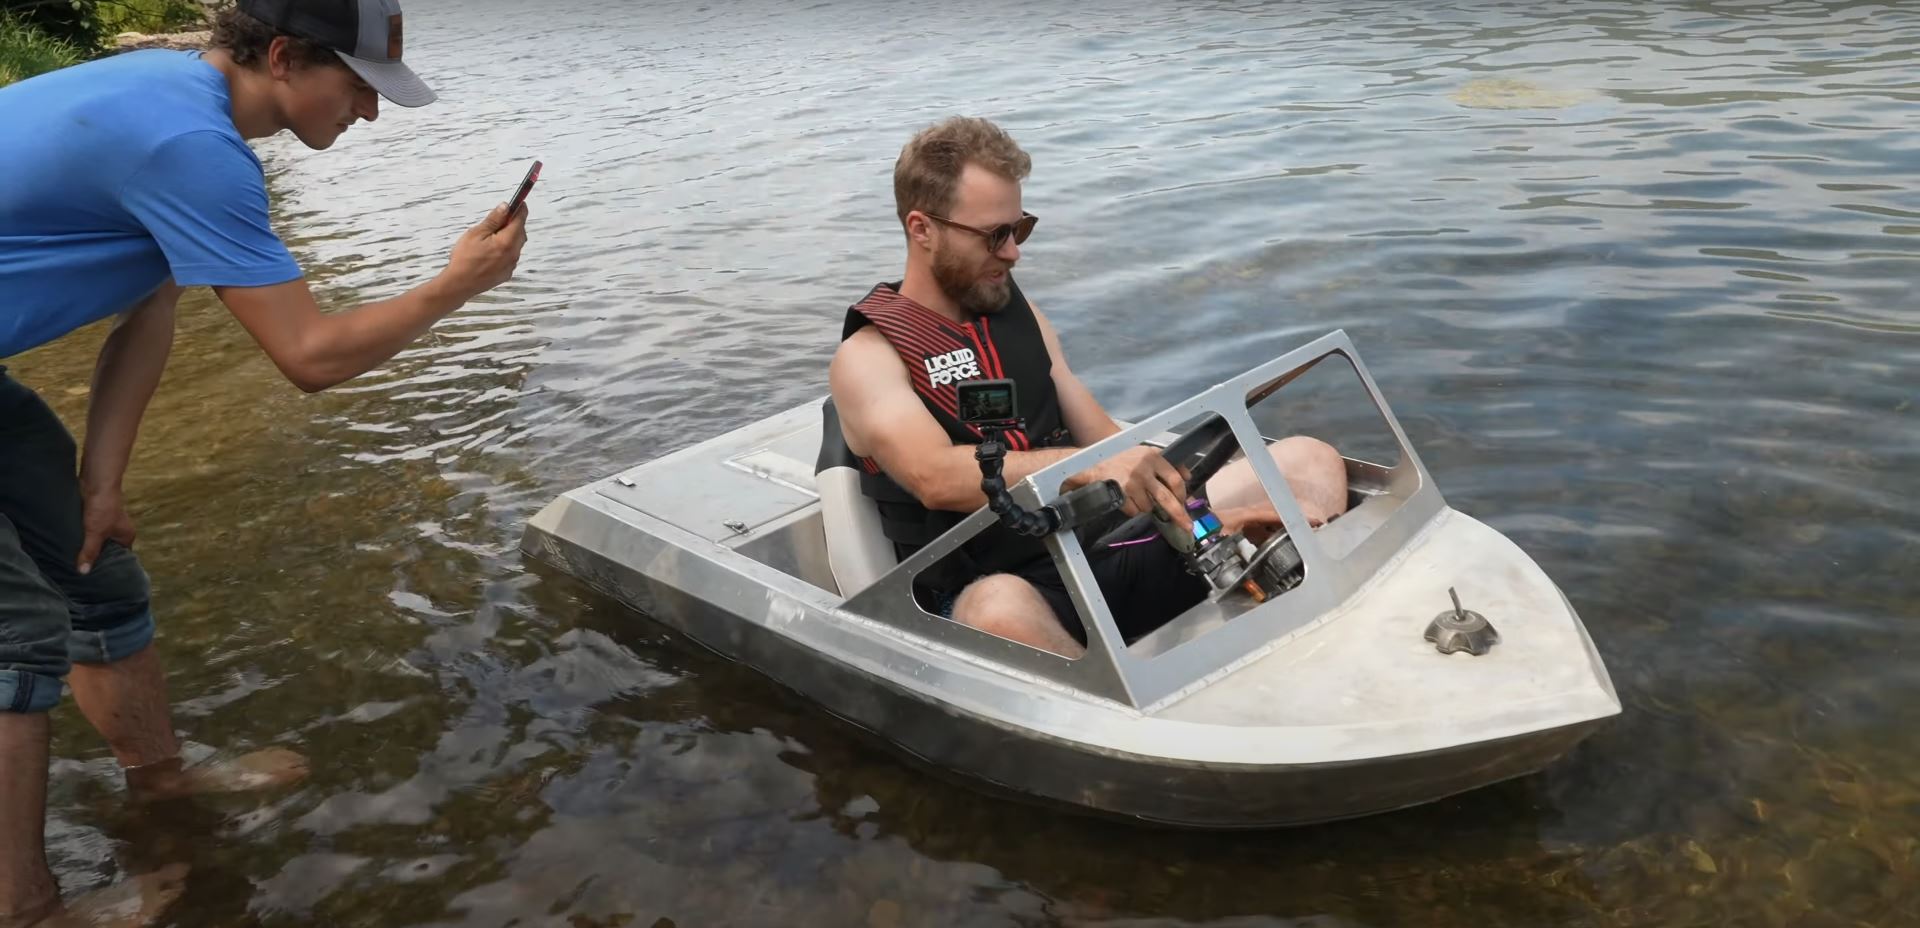 Two year old drives his own mini petrol powered speed boat. 